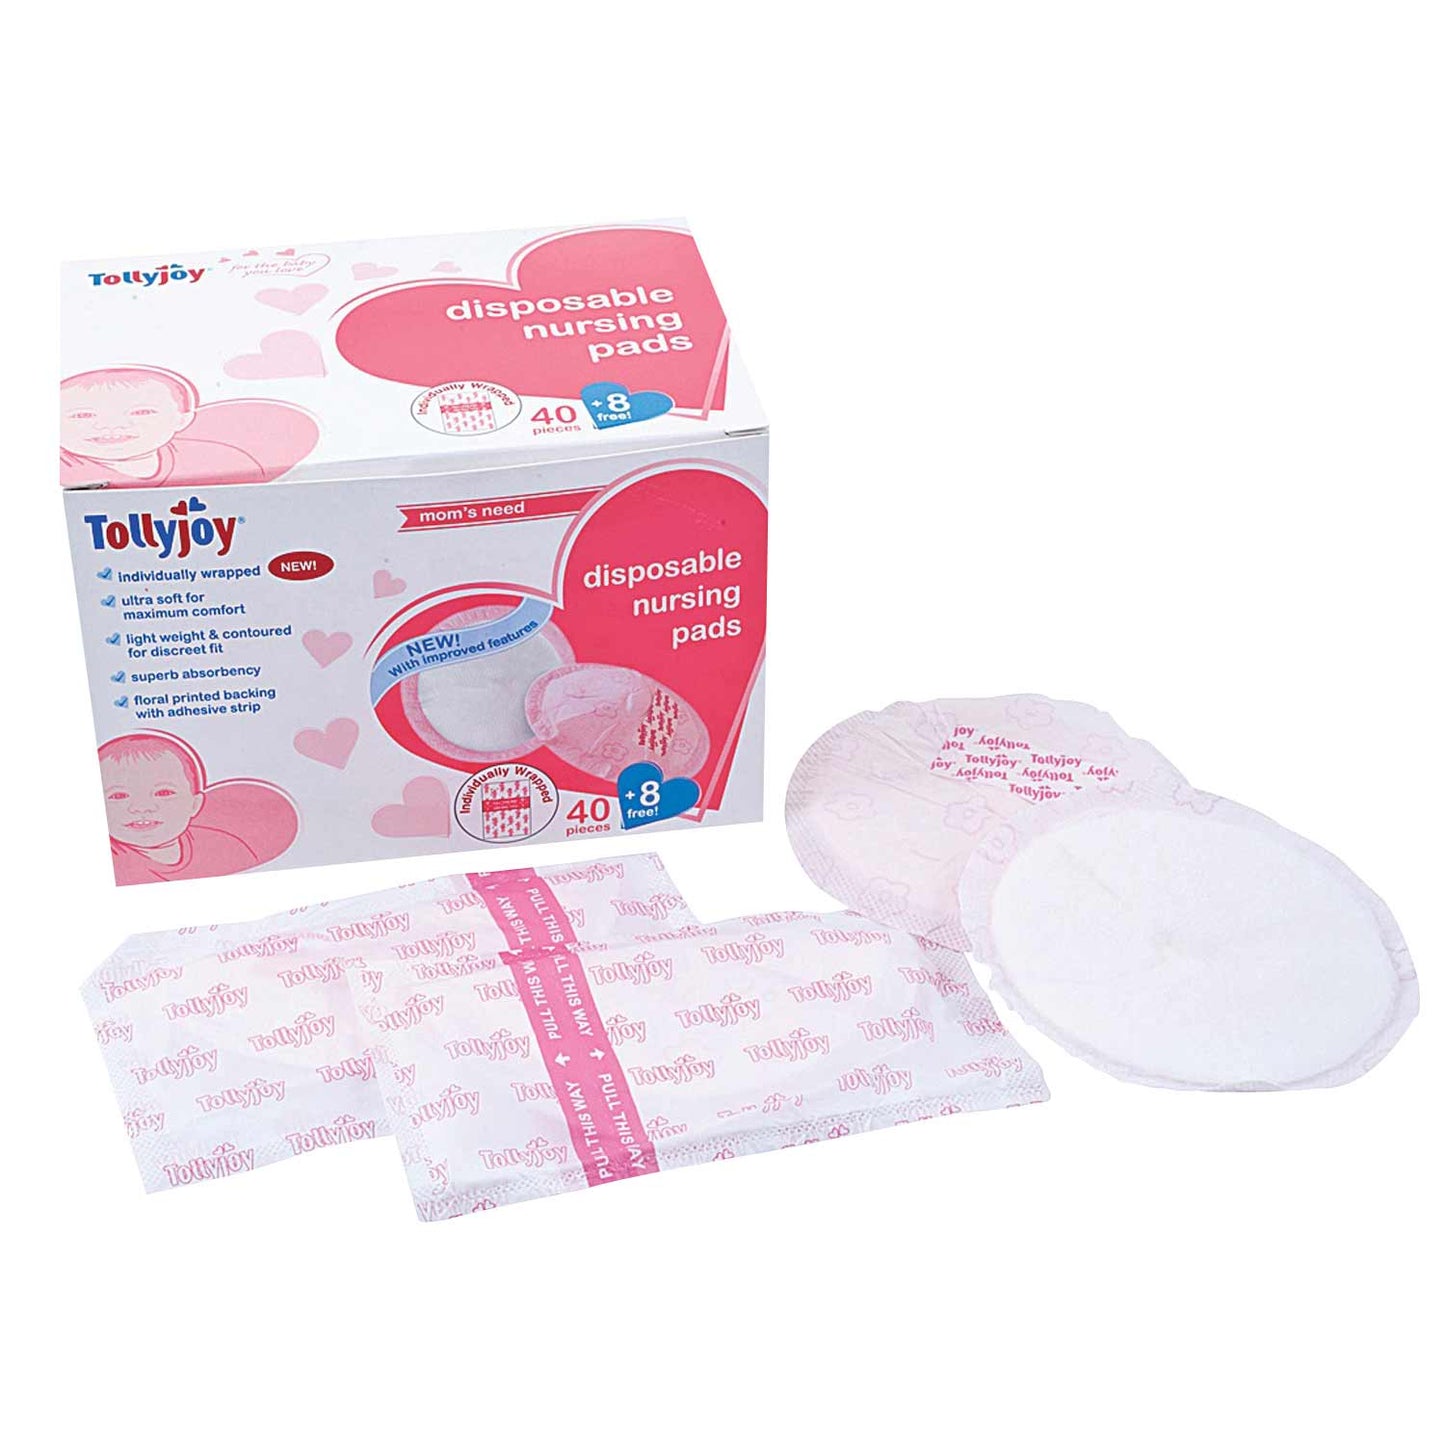 Day & Night Disp. Nursing Pads~48 Pack(Without Packing)